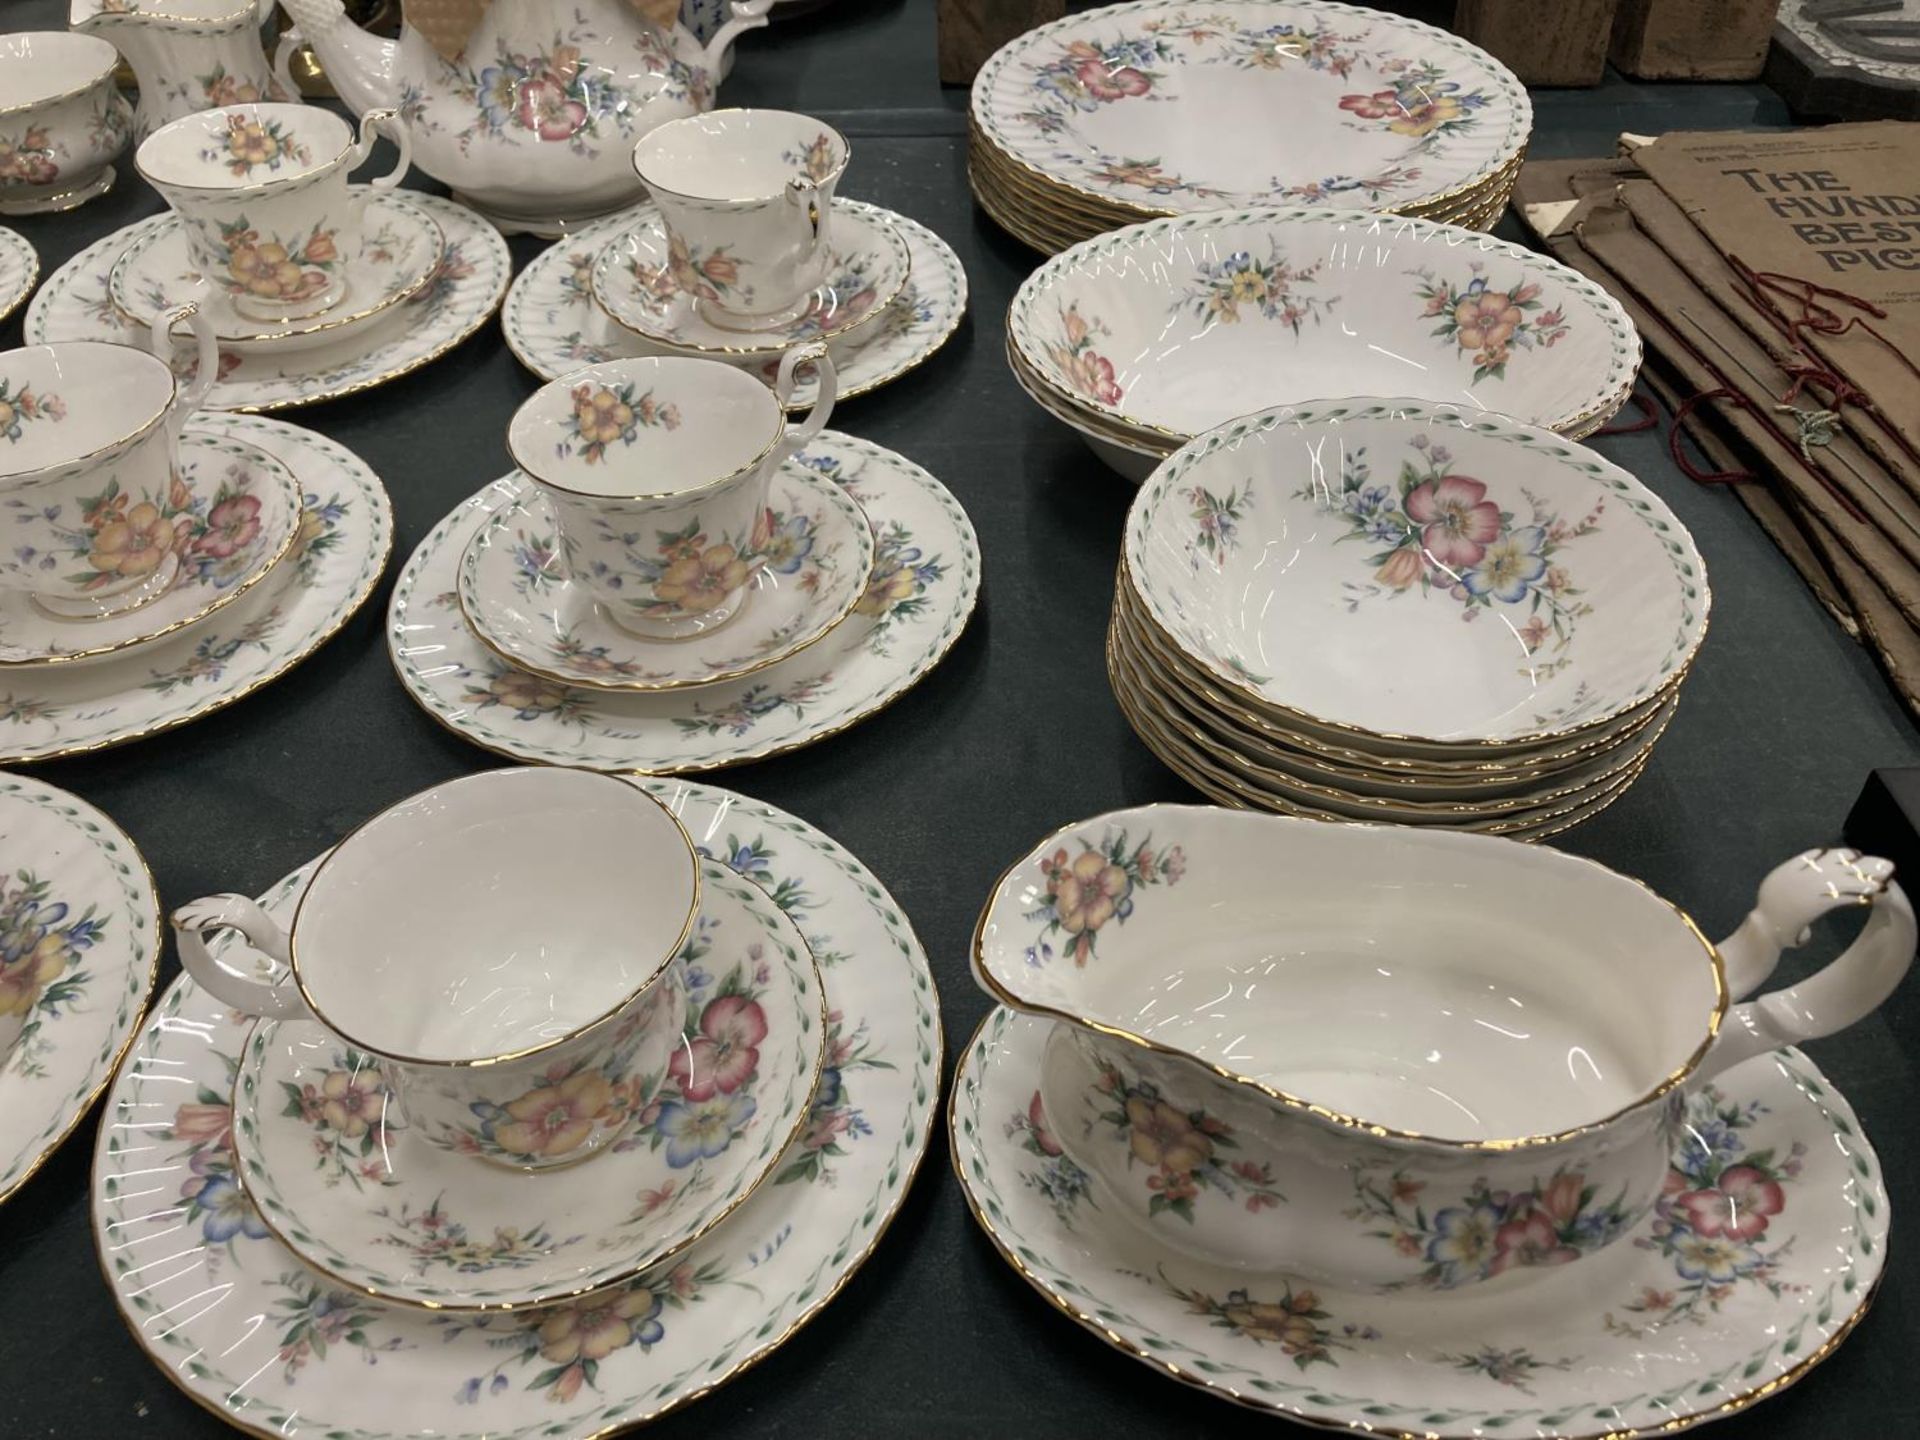 A LARGE QUANTITY OF ROYAL ALBERT 'CONSTANCE' TO INCLUDE A TEAPOT AND COFFEE POT, SIX COFFEE CUPS AND - Image 7 of 7